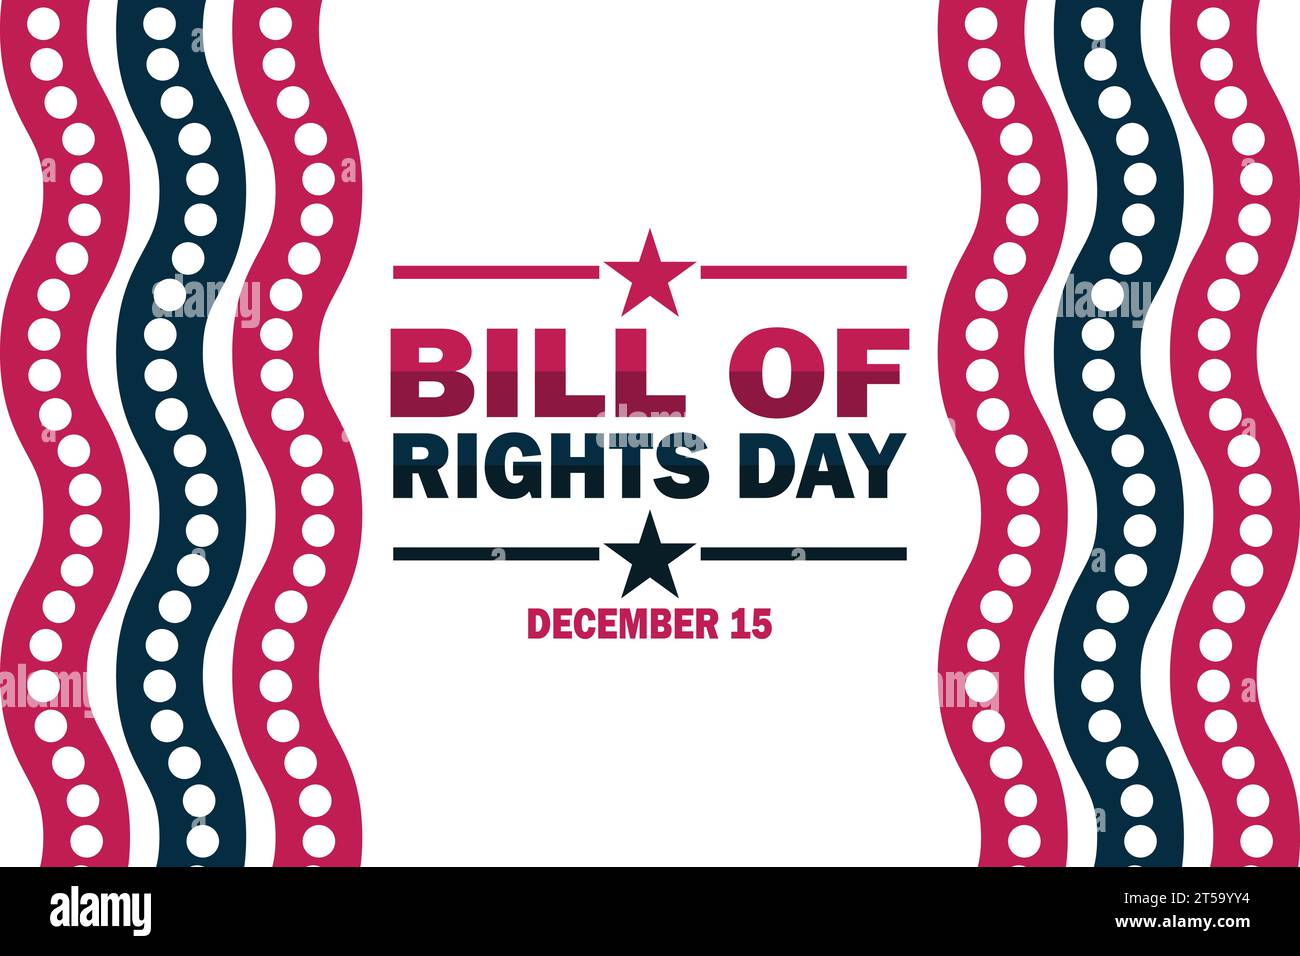 Bill Of Rights Day Vector illustration. December 15. Holiday concept. Template for background, banner, card, poster with text inscription. Stock Vector